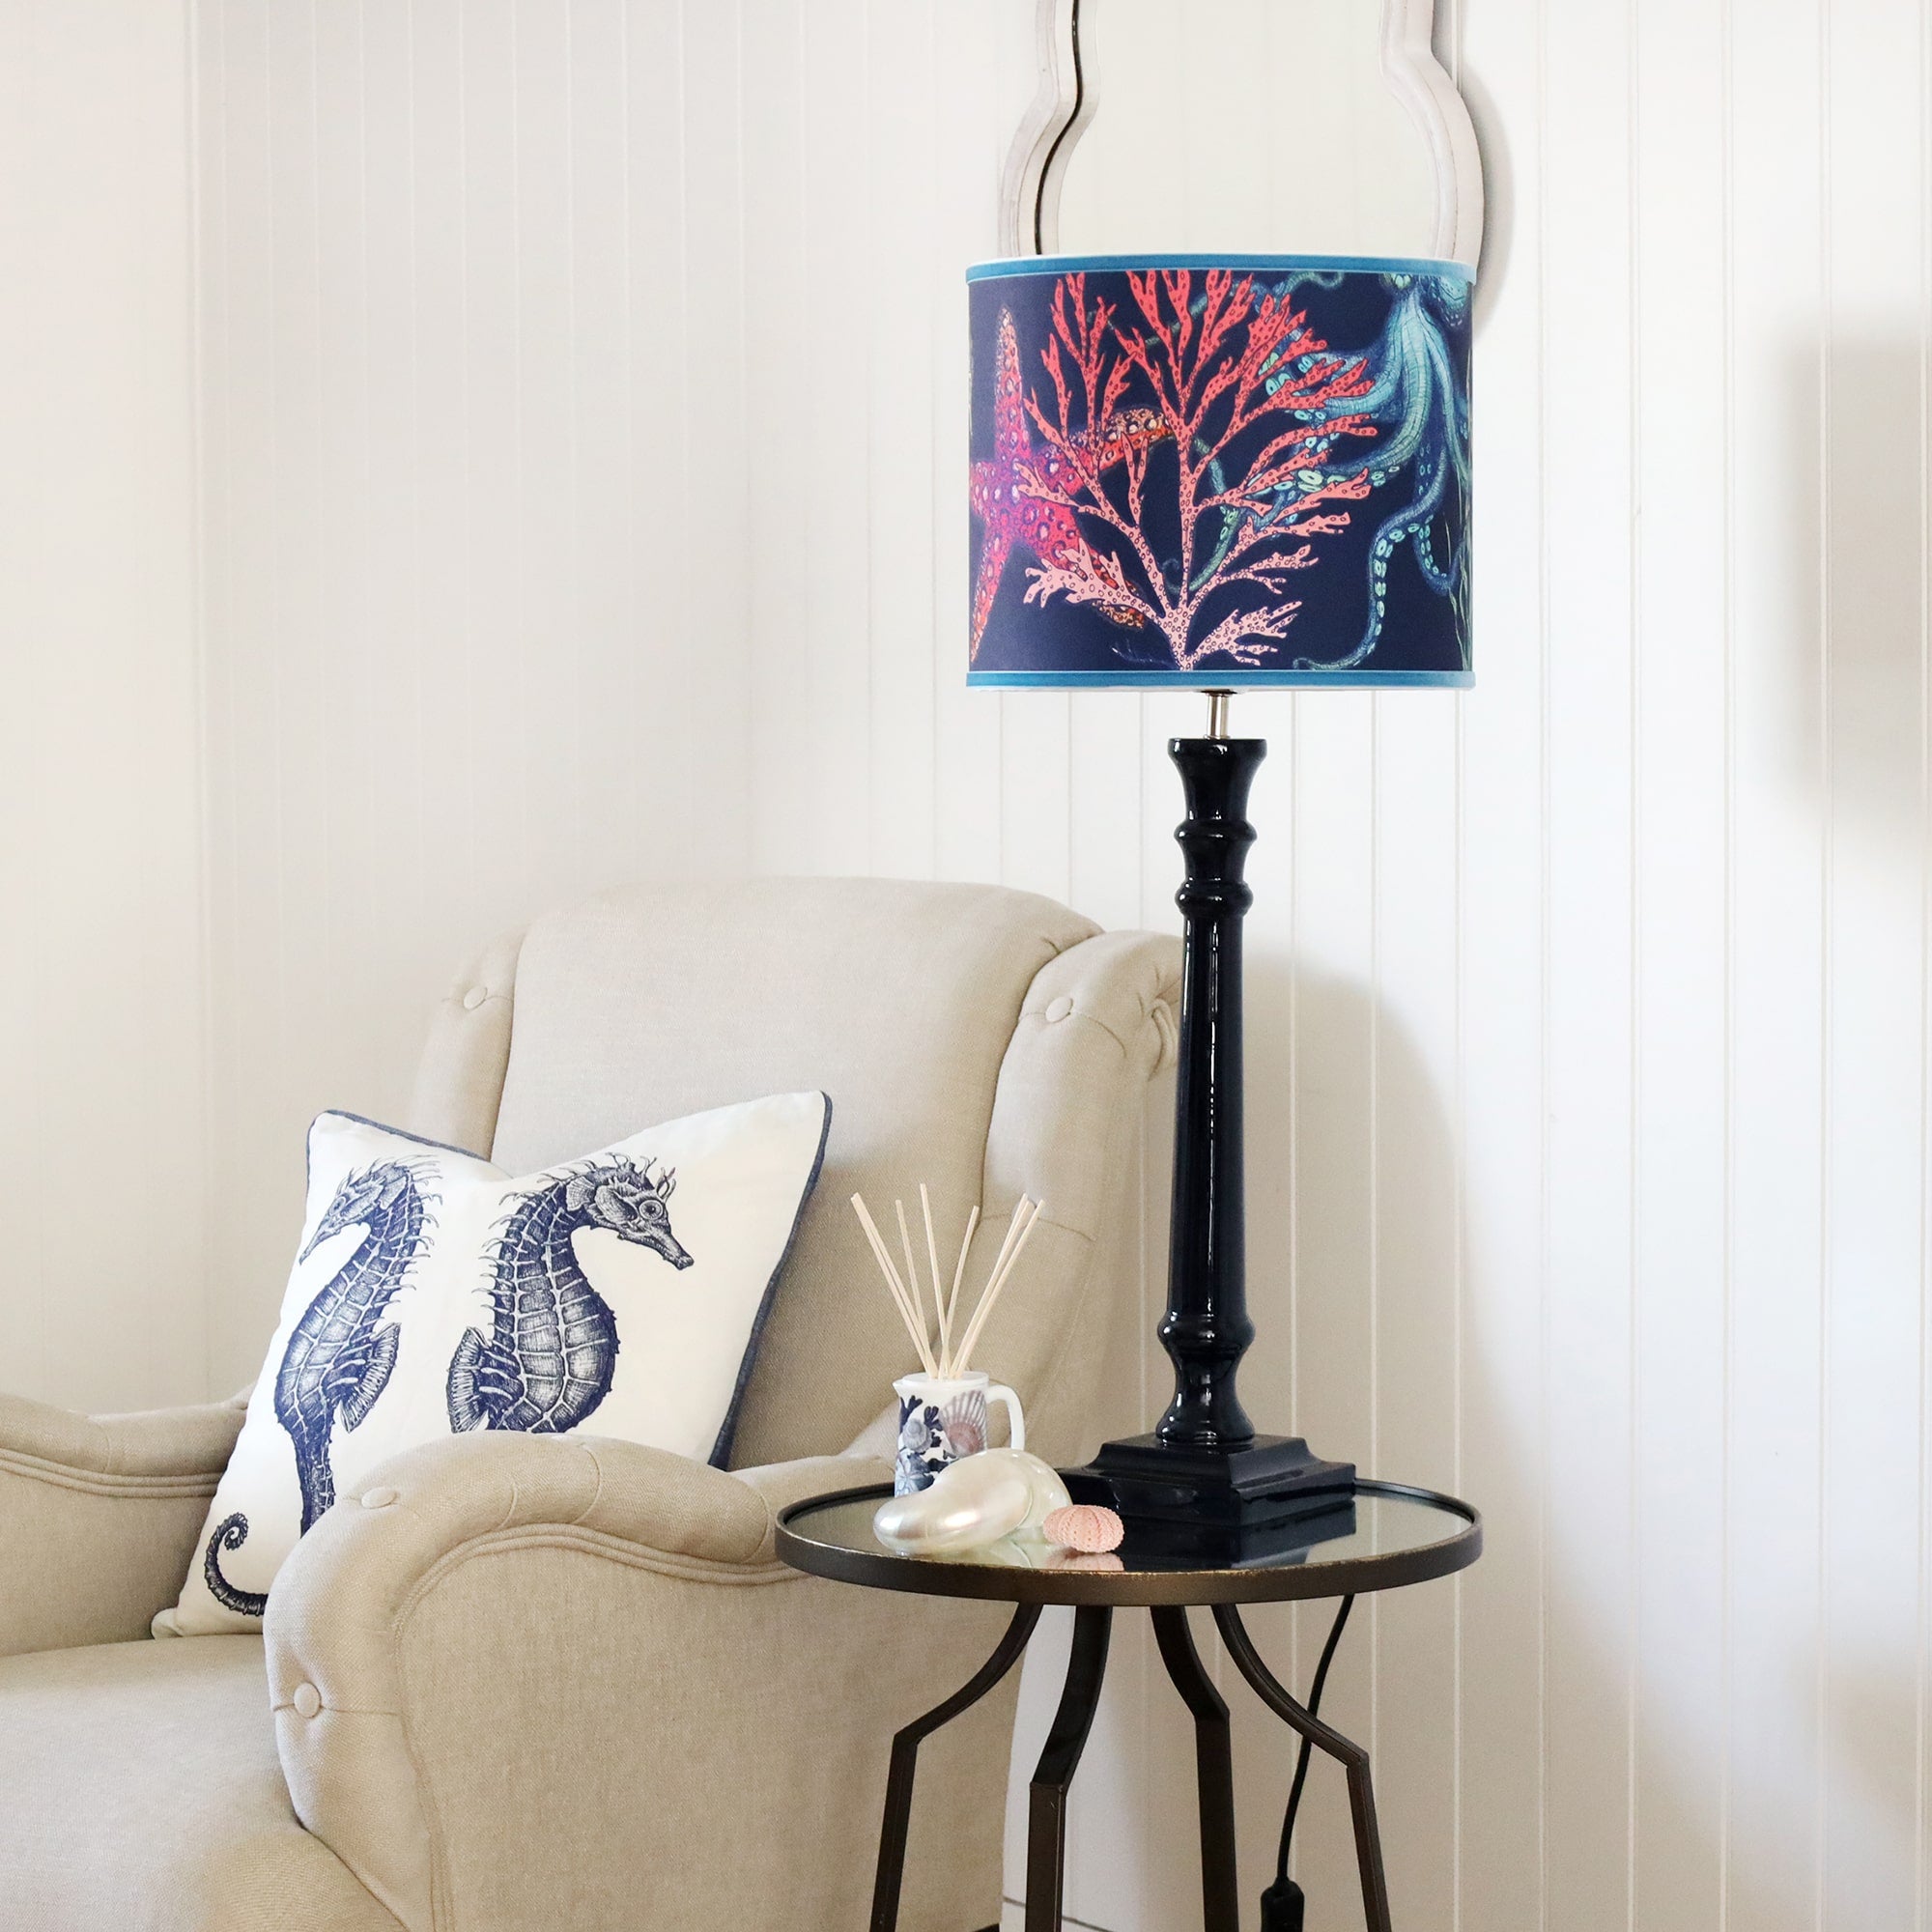 Navy Lacquer Godolphin lampbase  with a navy reef lampshade on a mirror table.On the table is a beachcomber diffuser with some shells placed on it.Next to the table is a chair with a seahorse cushion